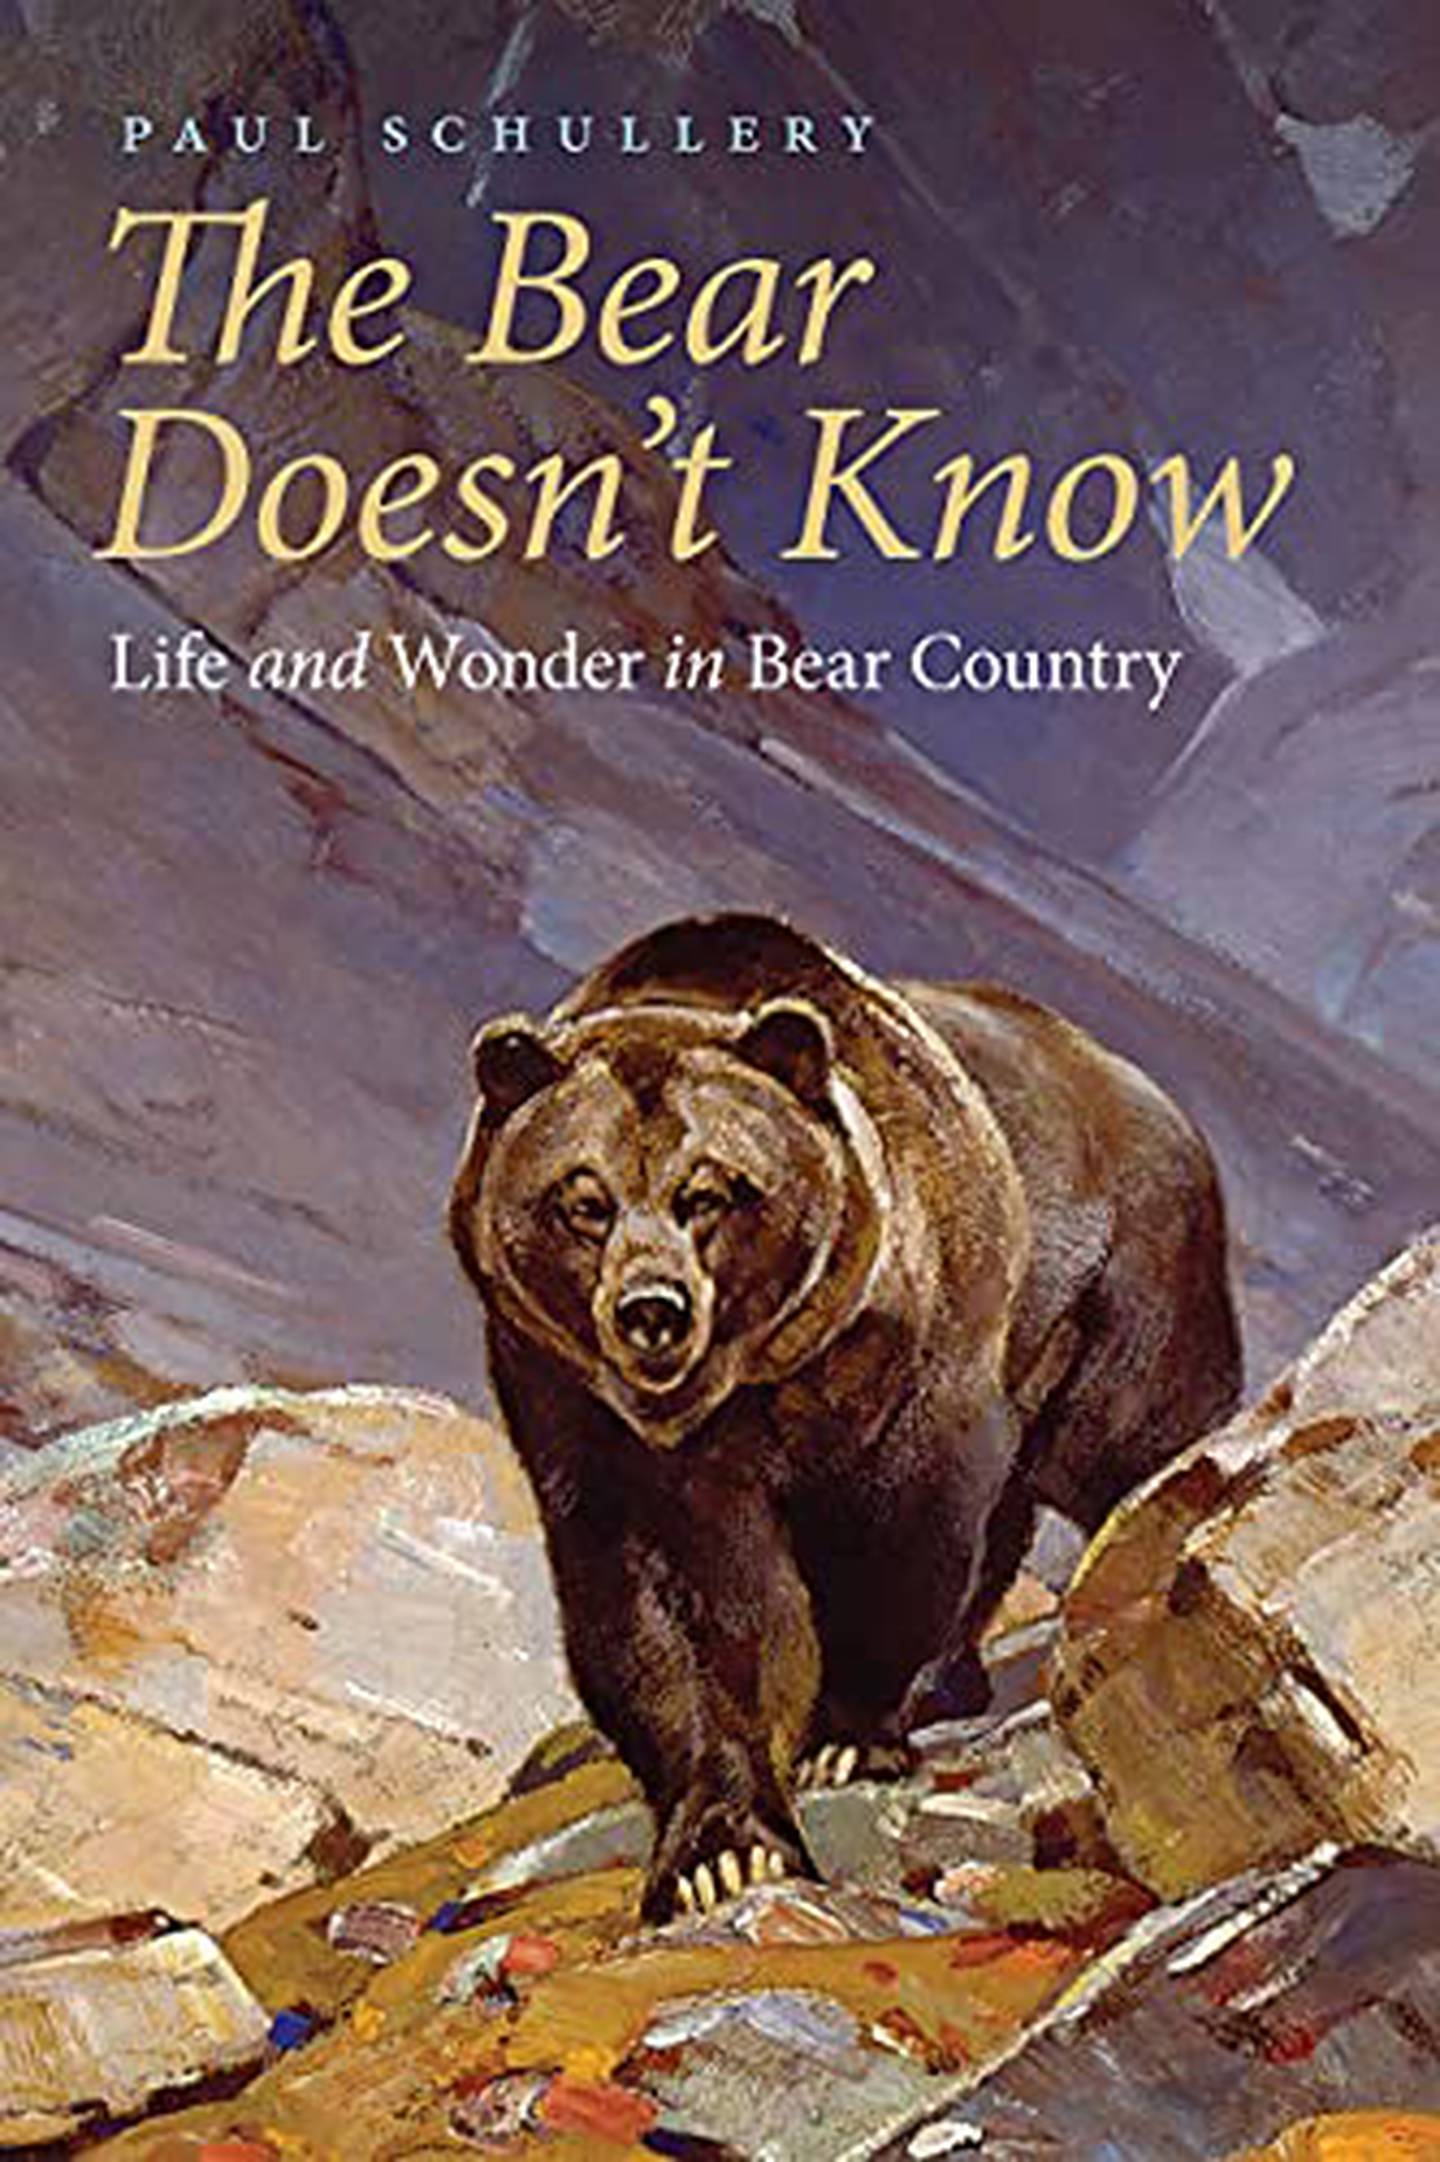 “The Bear Doesn’t Know: Life and Wonder in Bear Country,” by Paul Schullery